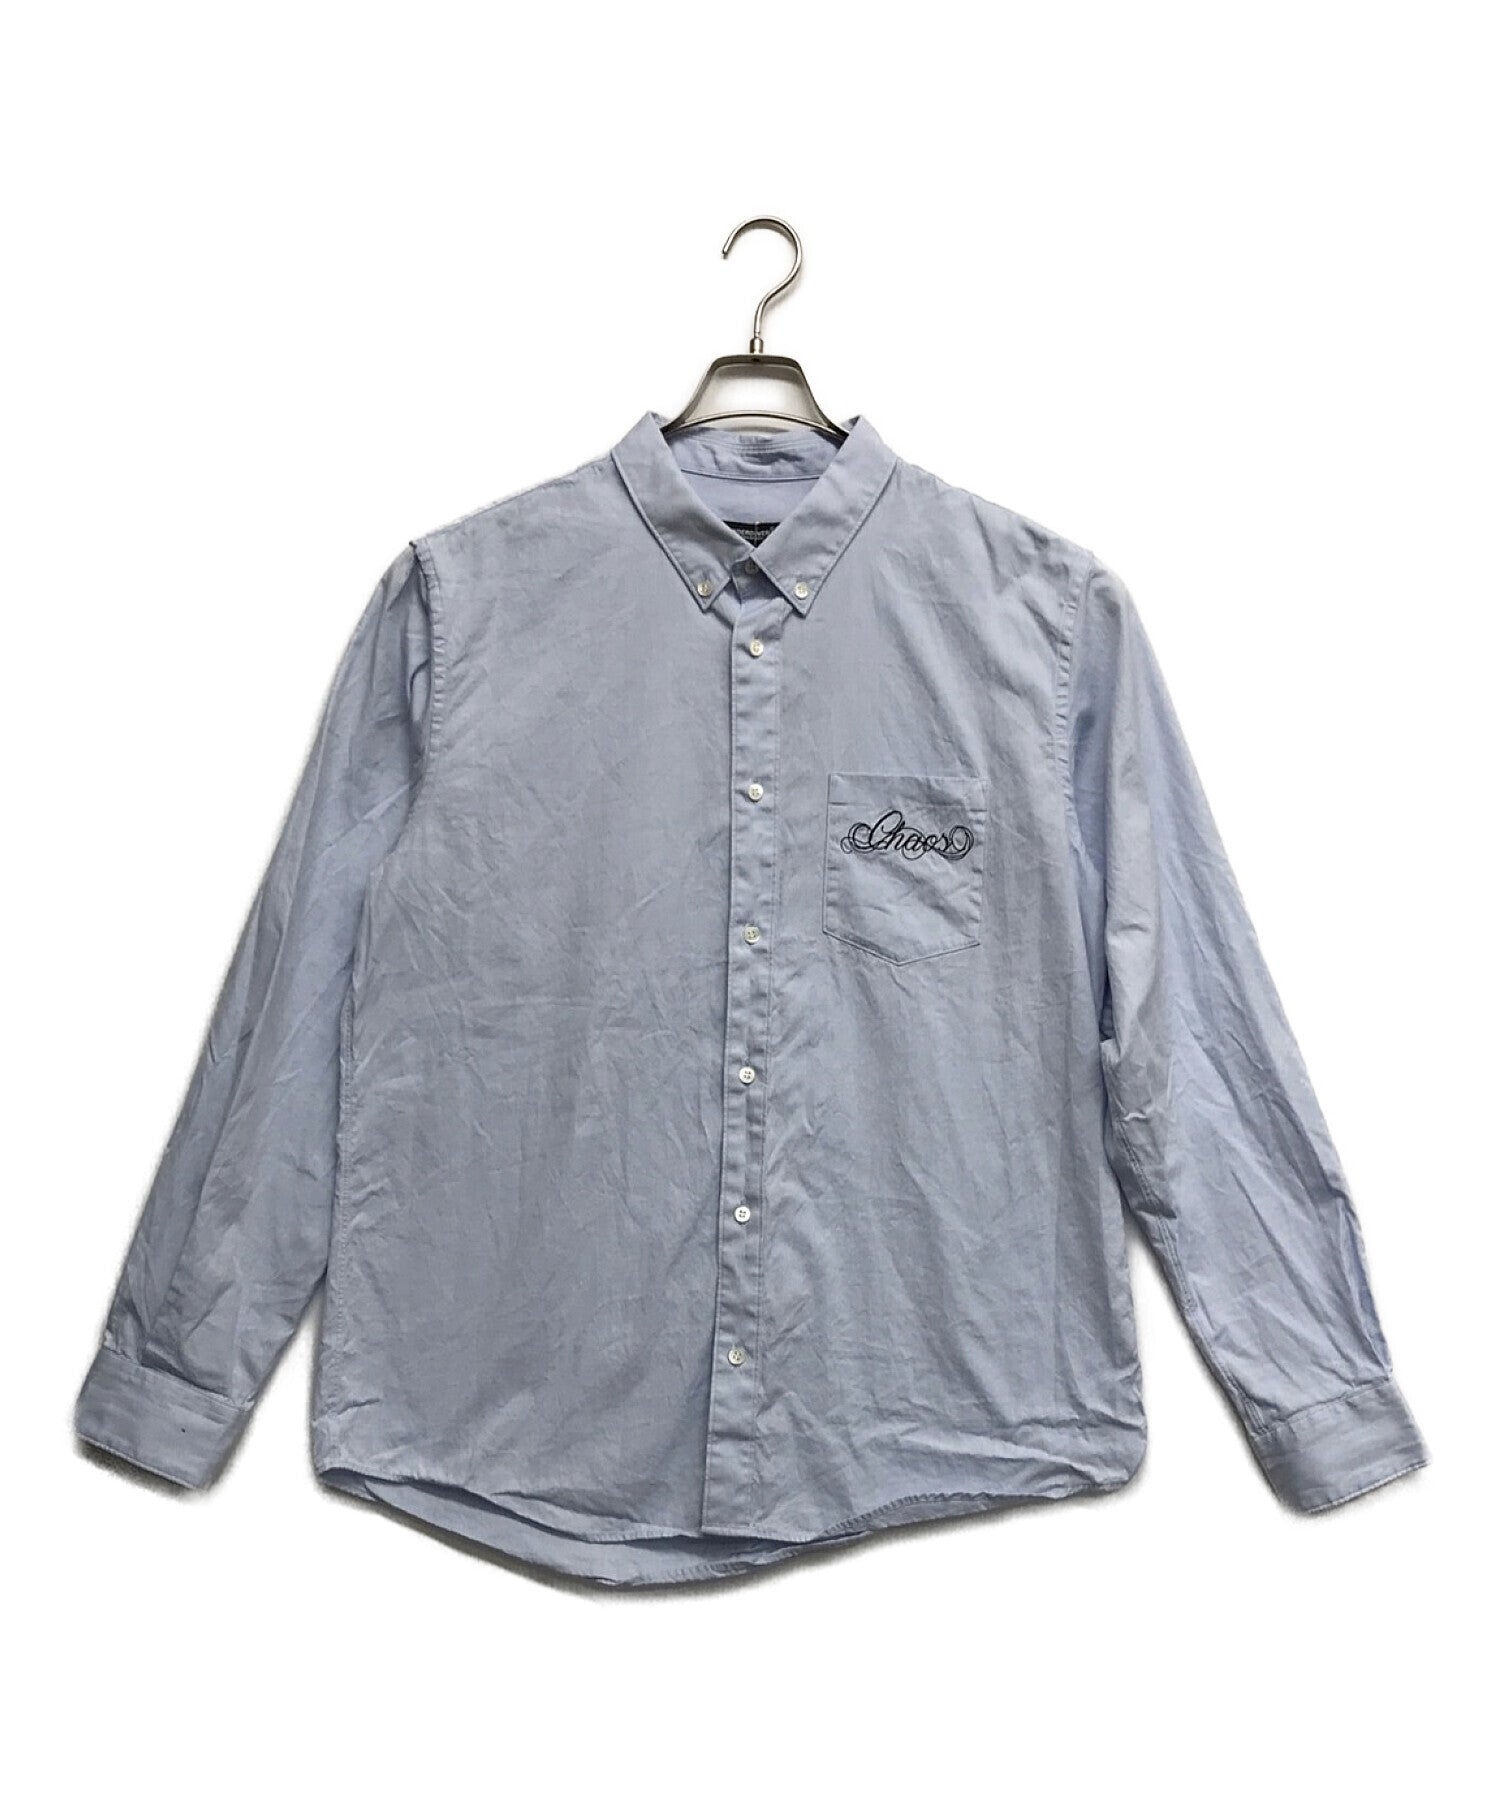 UNDERCOVER One Point Embroidery Button Down Shirt Shirt Long Sleeve Sh